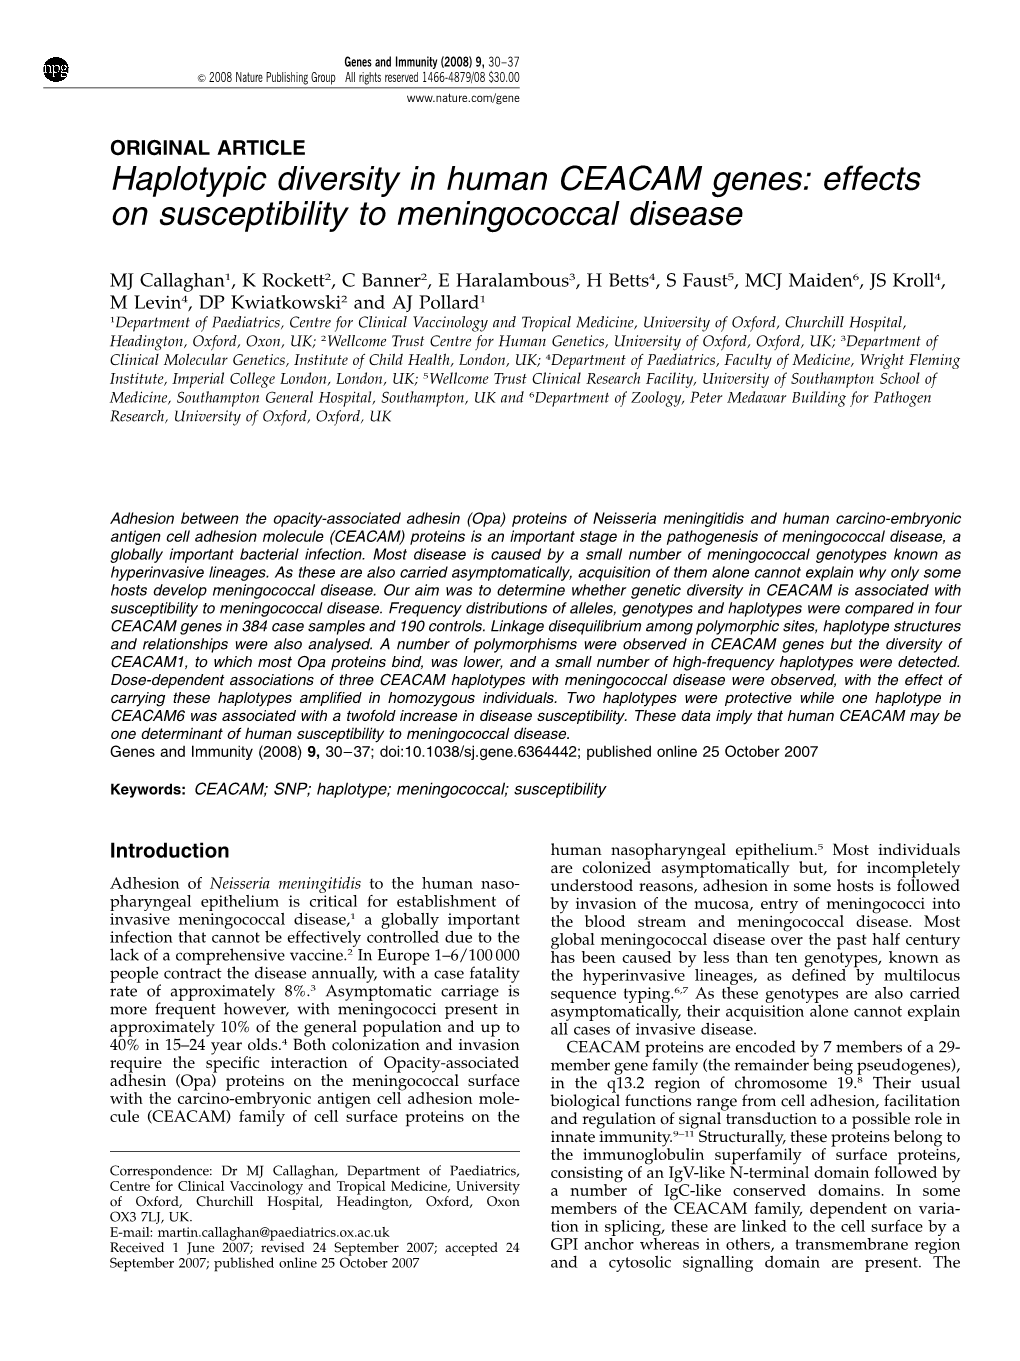 Effects on Susceptibility to Meningococcal Disease